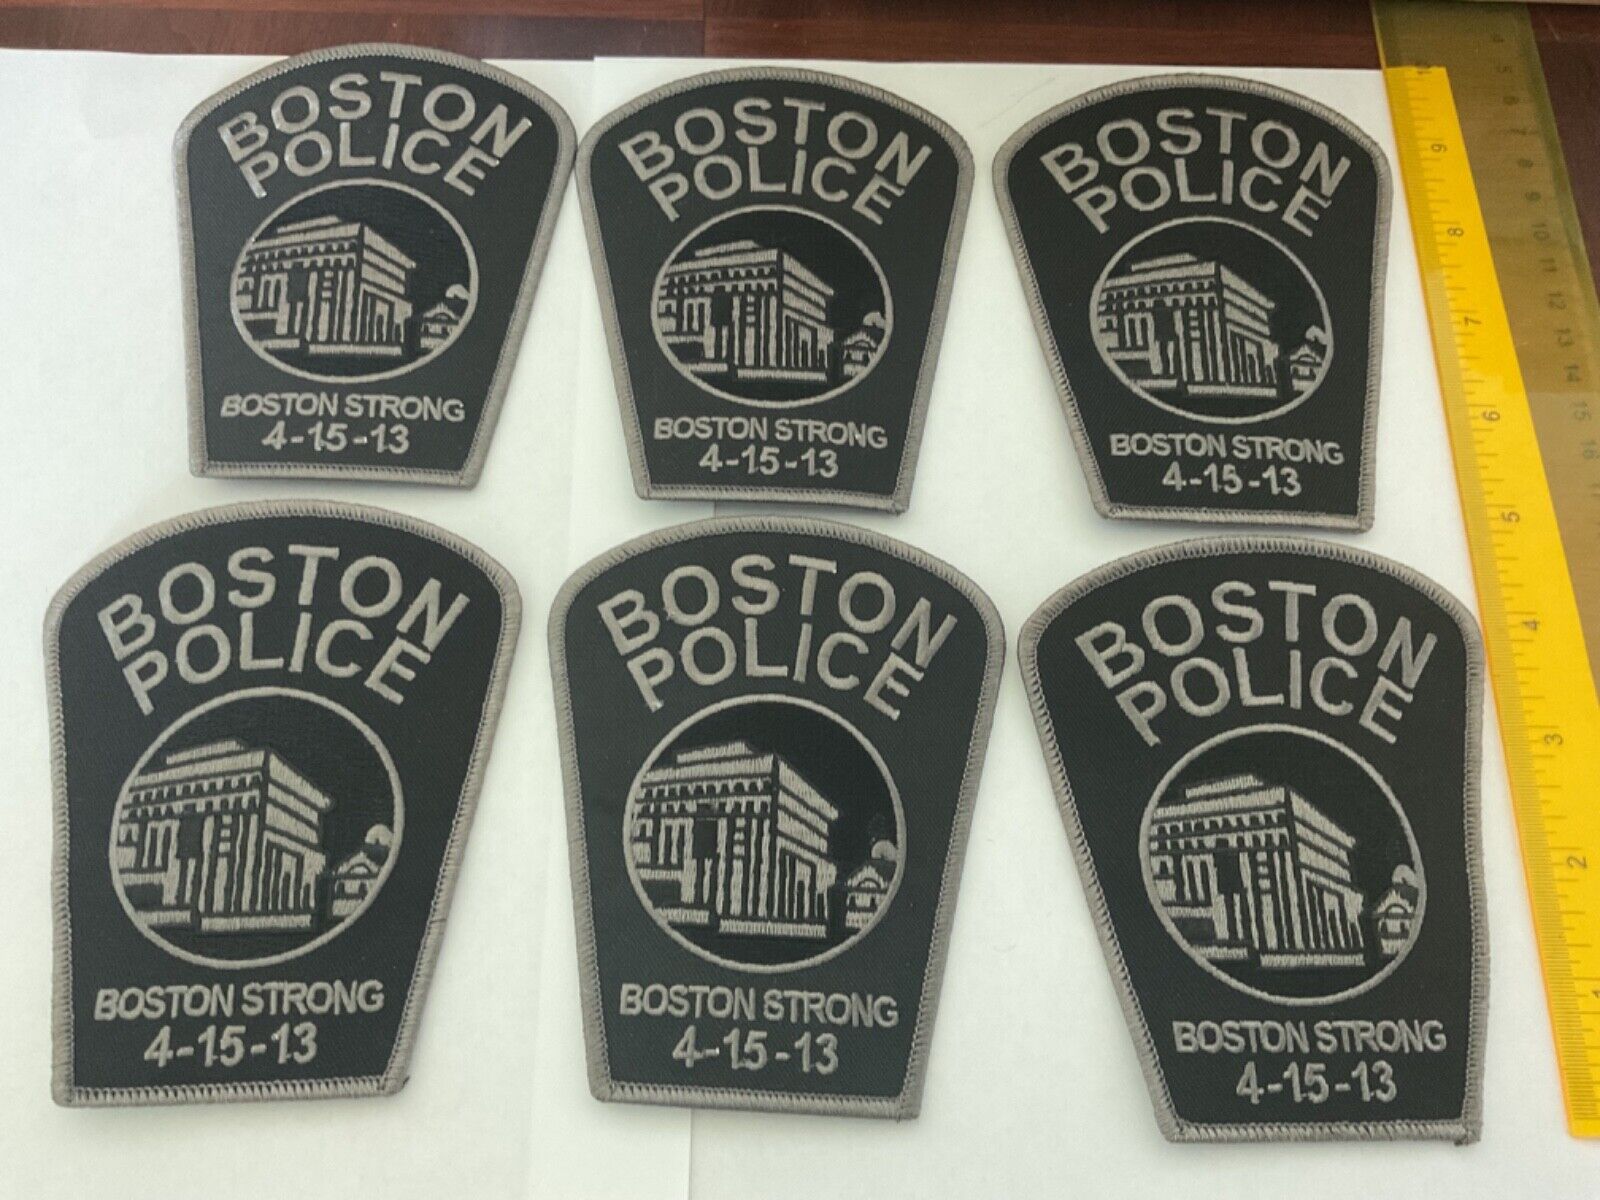 Boston Police ,Boston Strong 4-13-13 collectable  Subdued Patch Set 6 pieces.